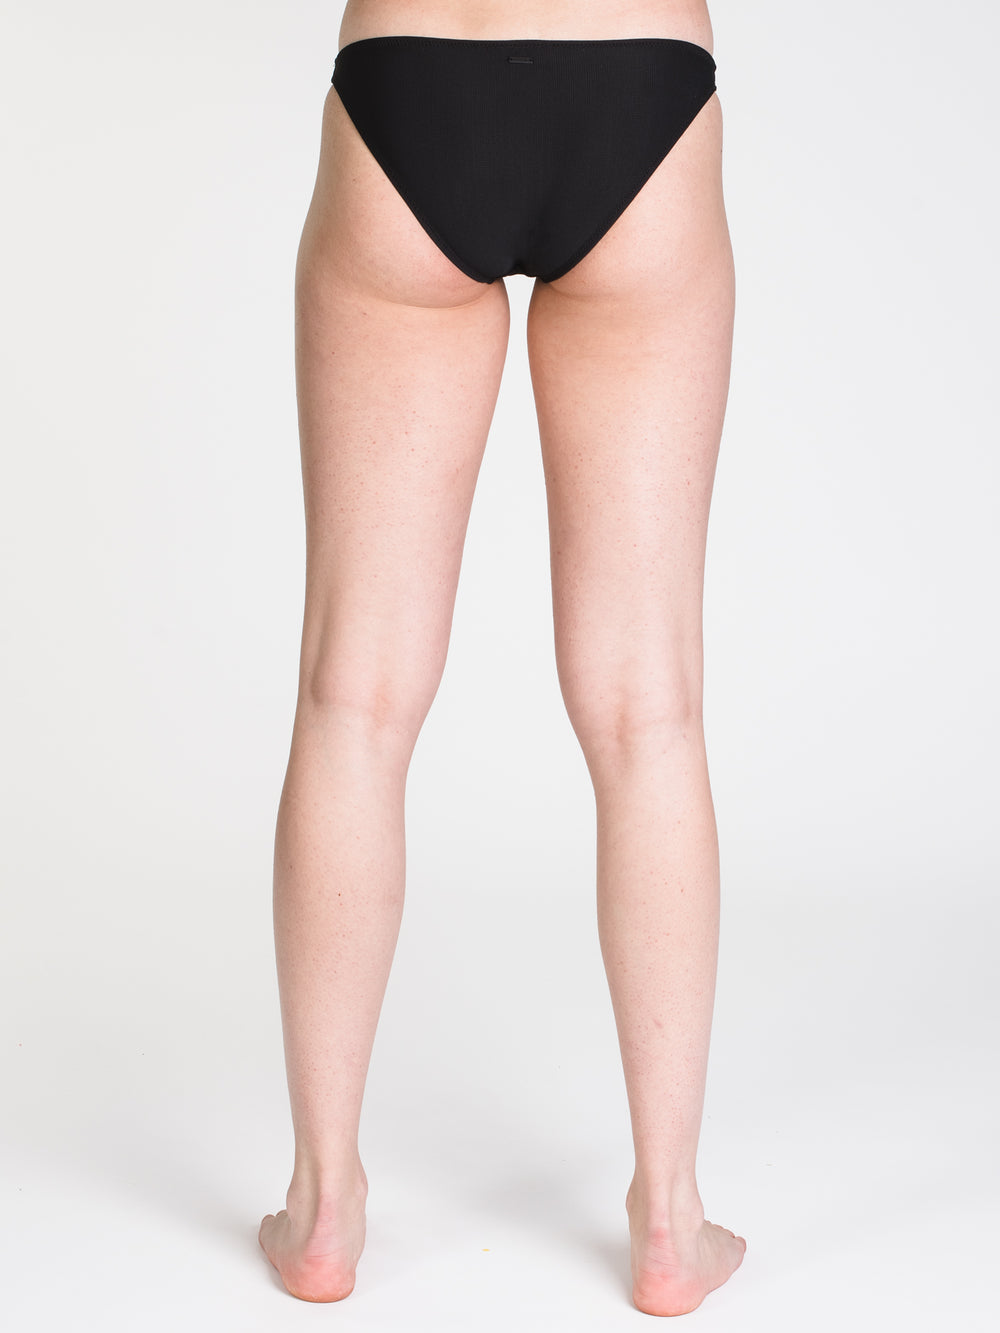 SIMPLY MESH HIPSTER - BLACK - CLEARANCE